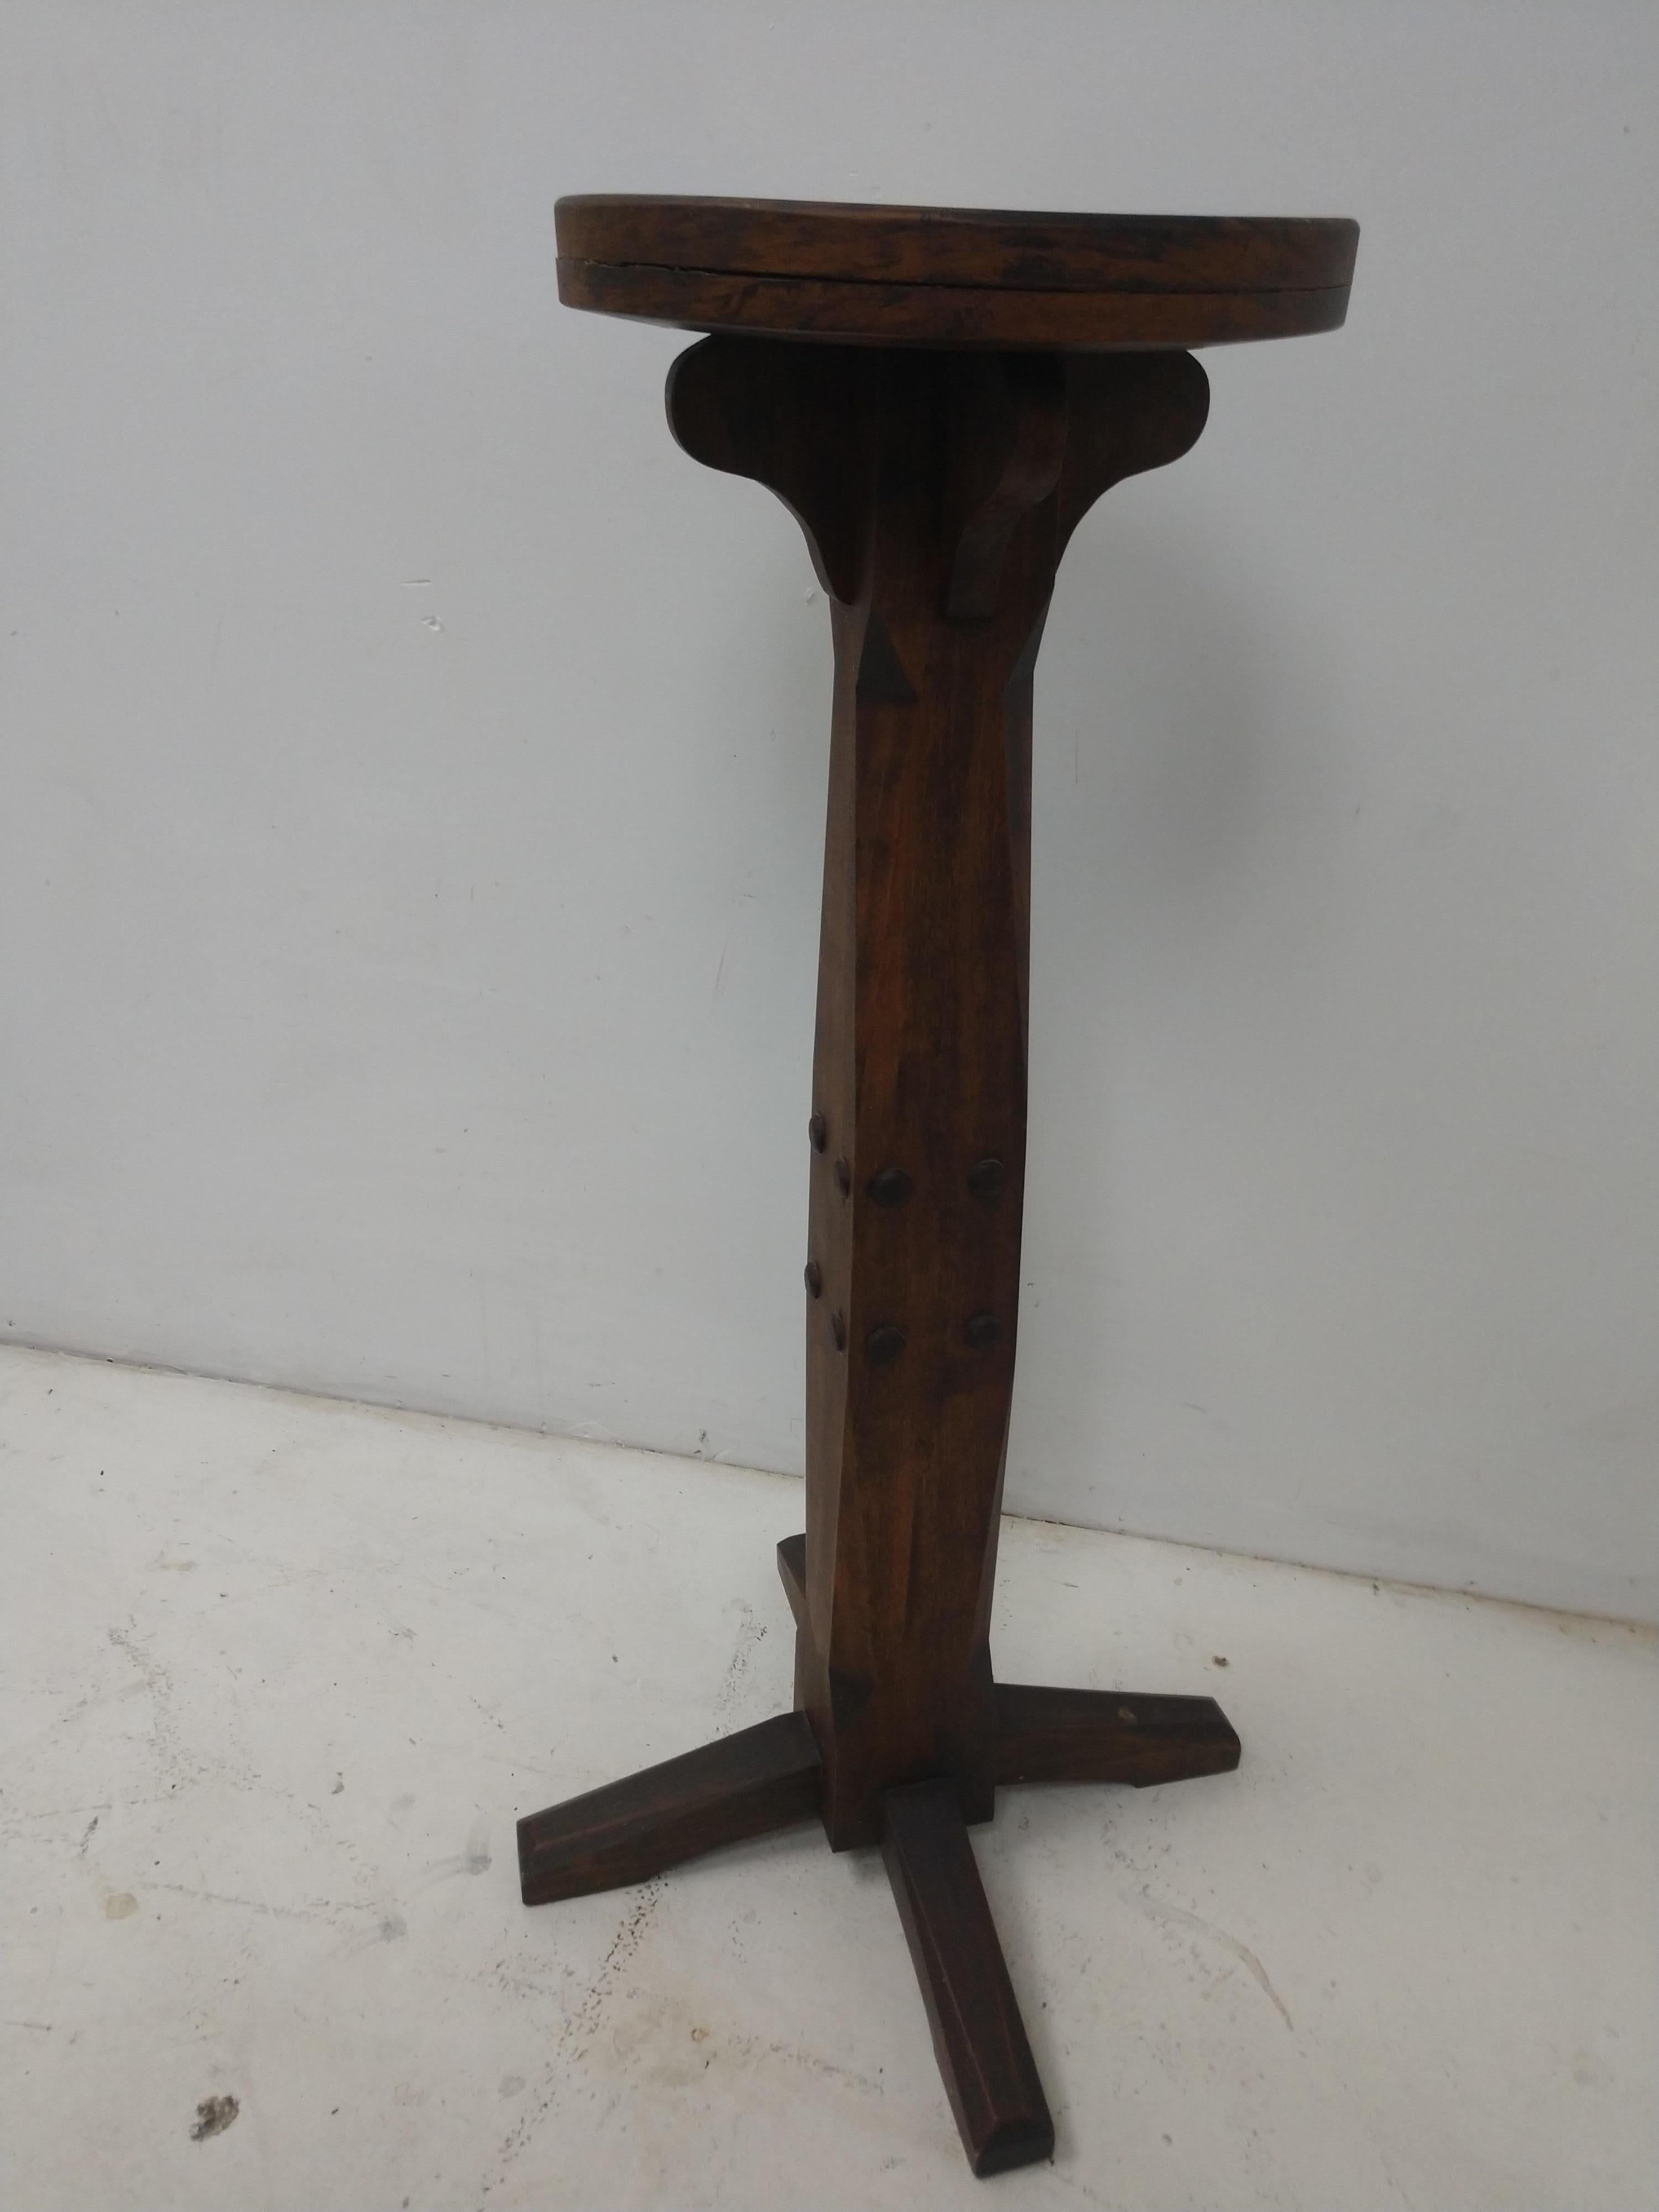 Hand-Crafted Arts & Crafts Pedestal Art Display Plant Stand, circa 1910